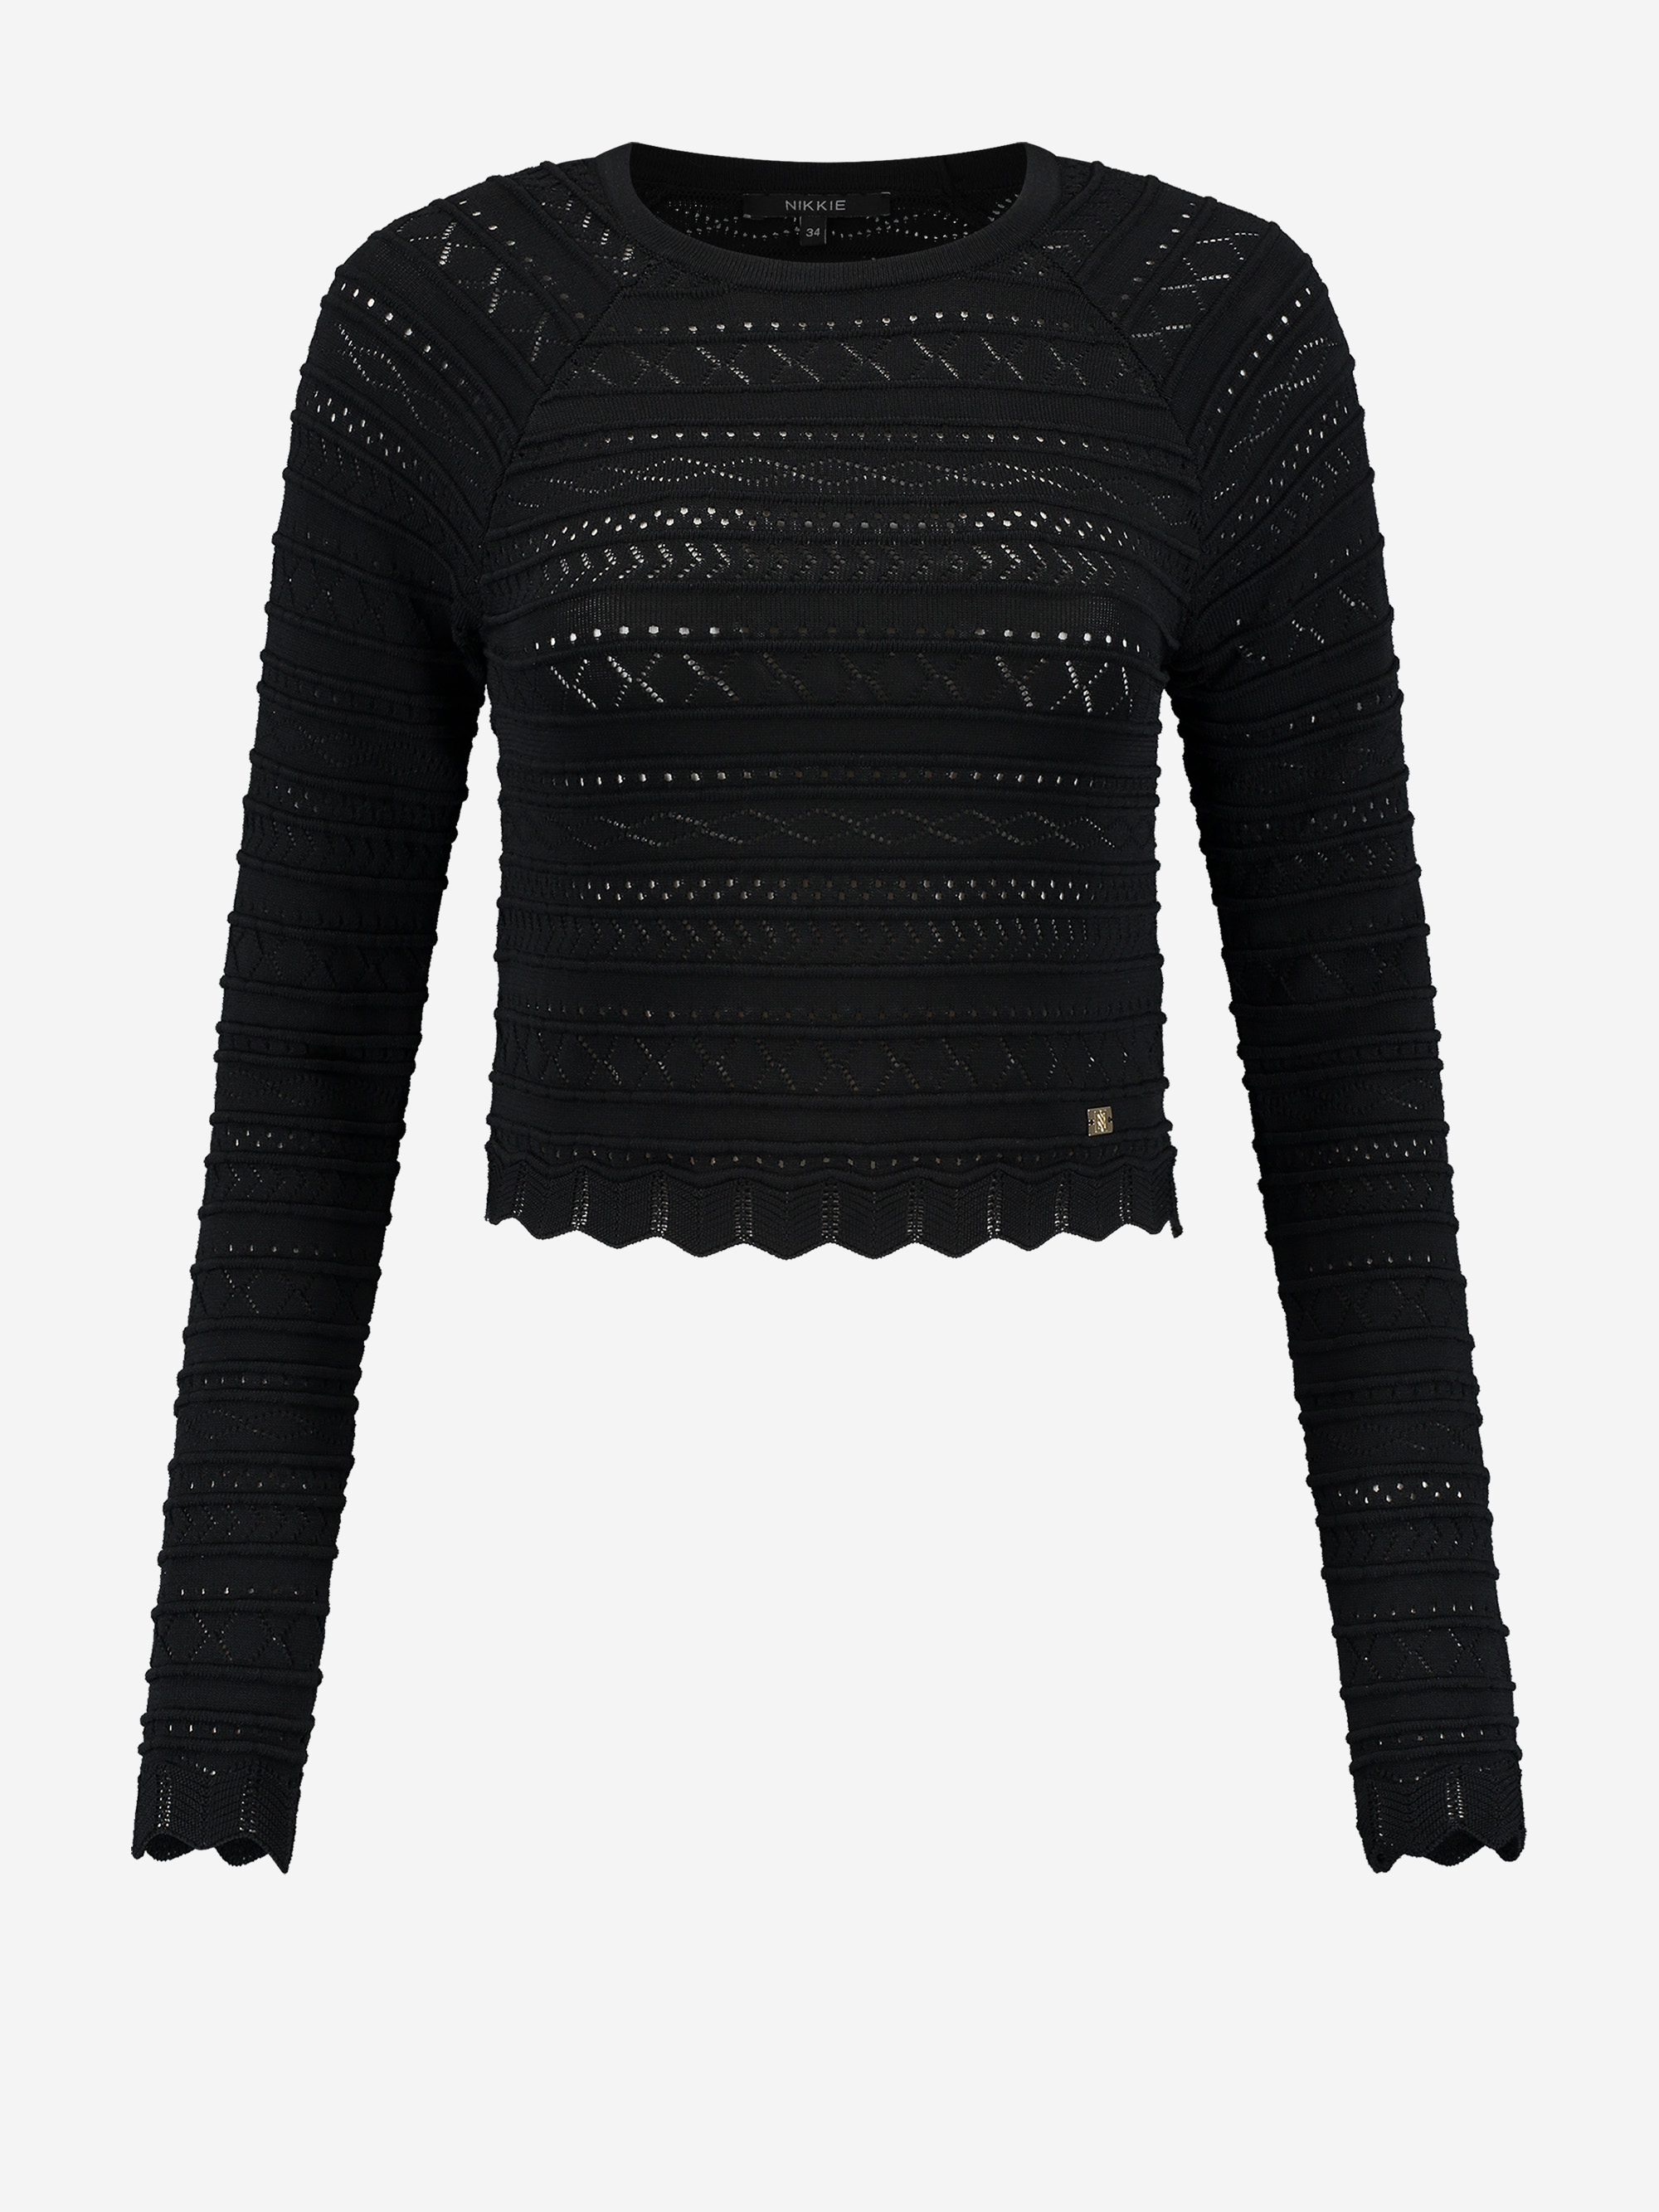 Cropped Ajour knit top